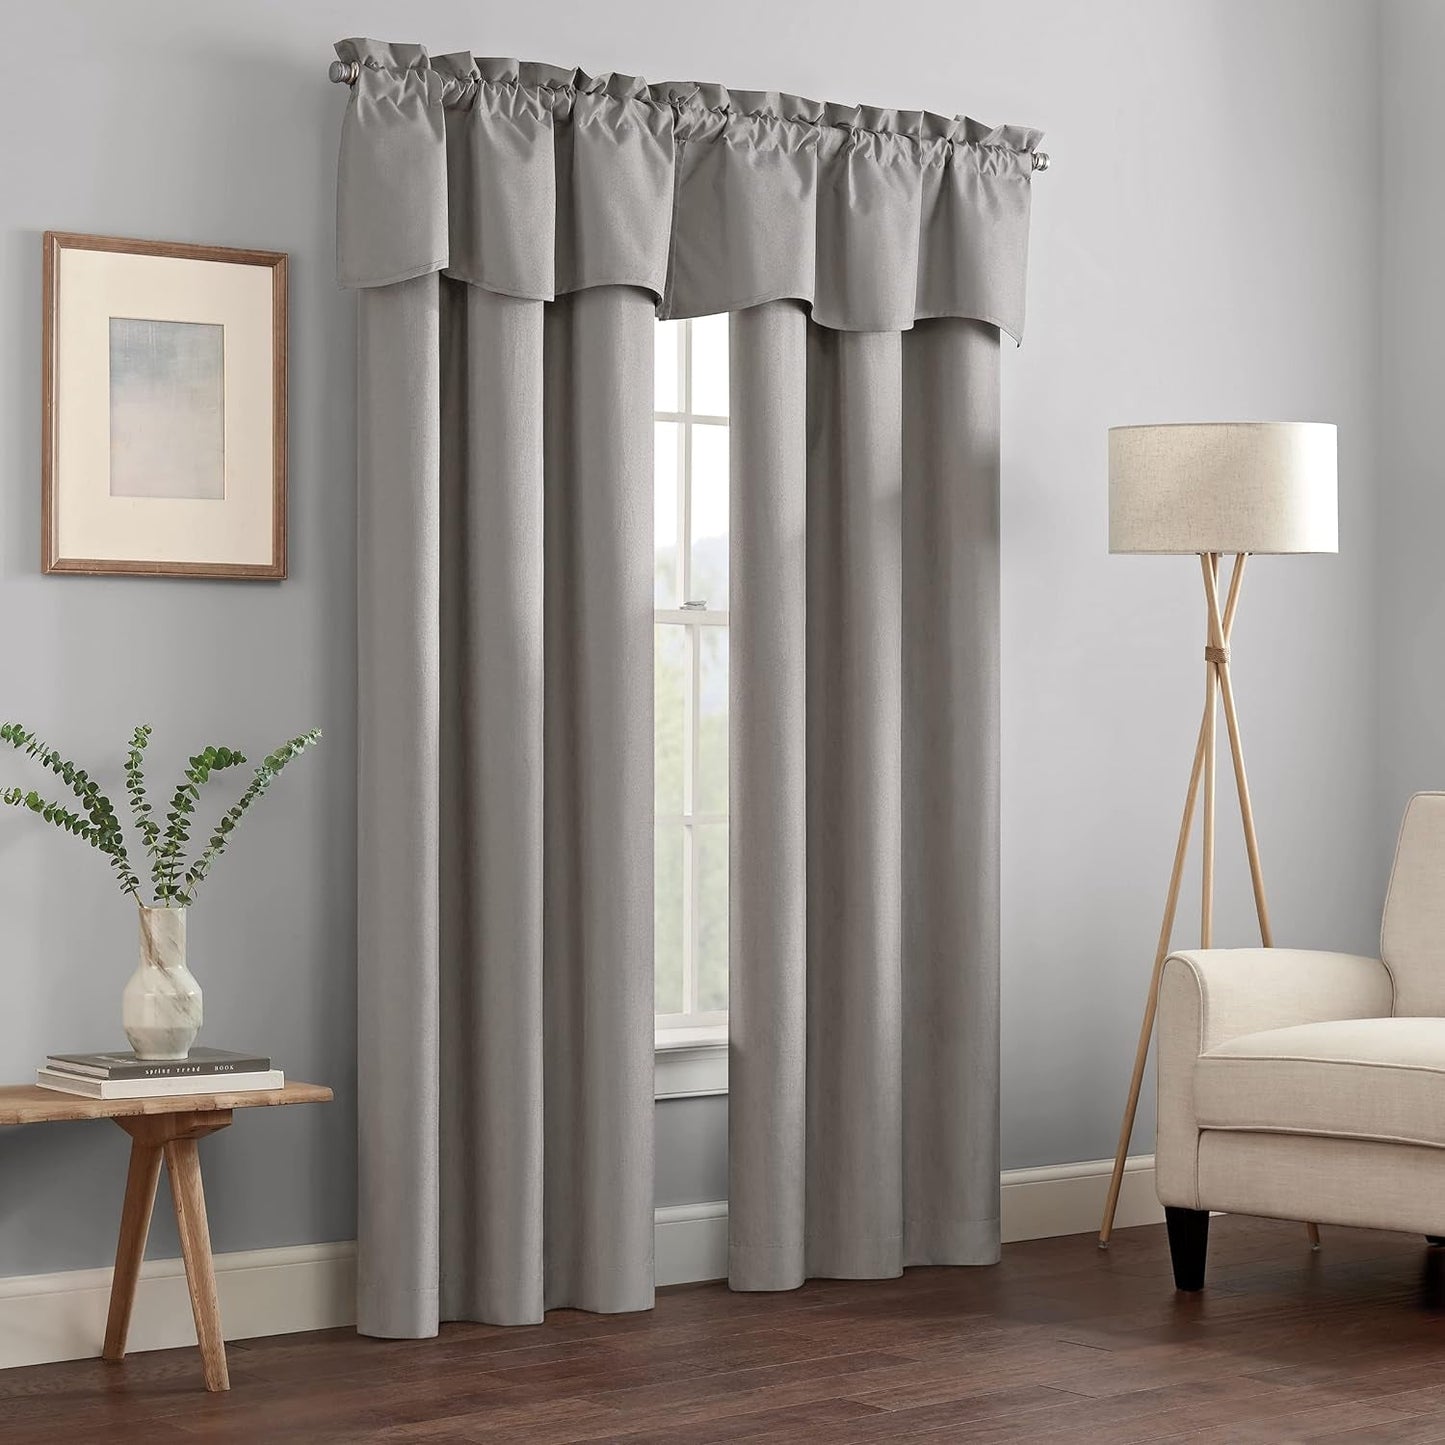 Eclipse Kendall Modern Scalloped Valance Rod Pocket Window Curtain for Kitchen or Bathroom, 42 in X 18 In, Grey